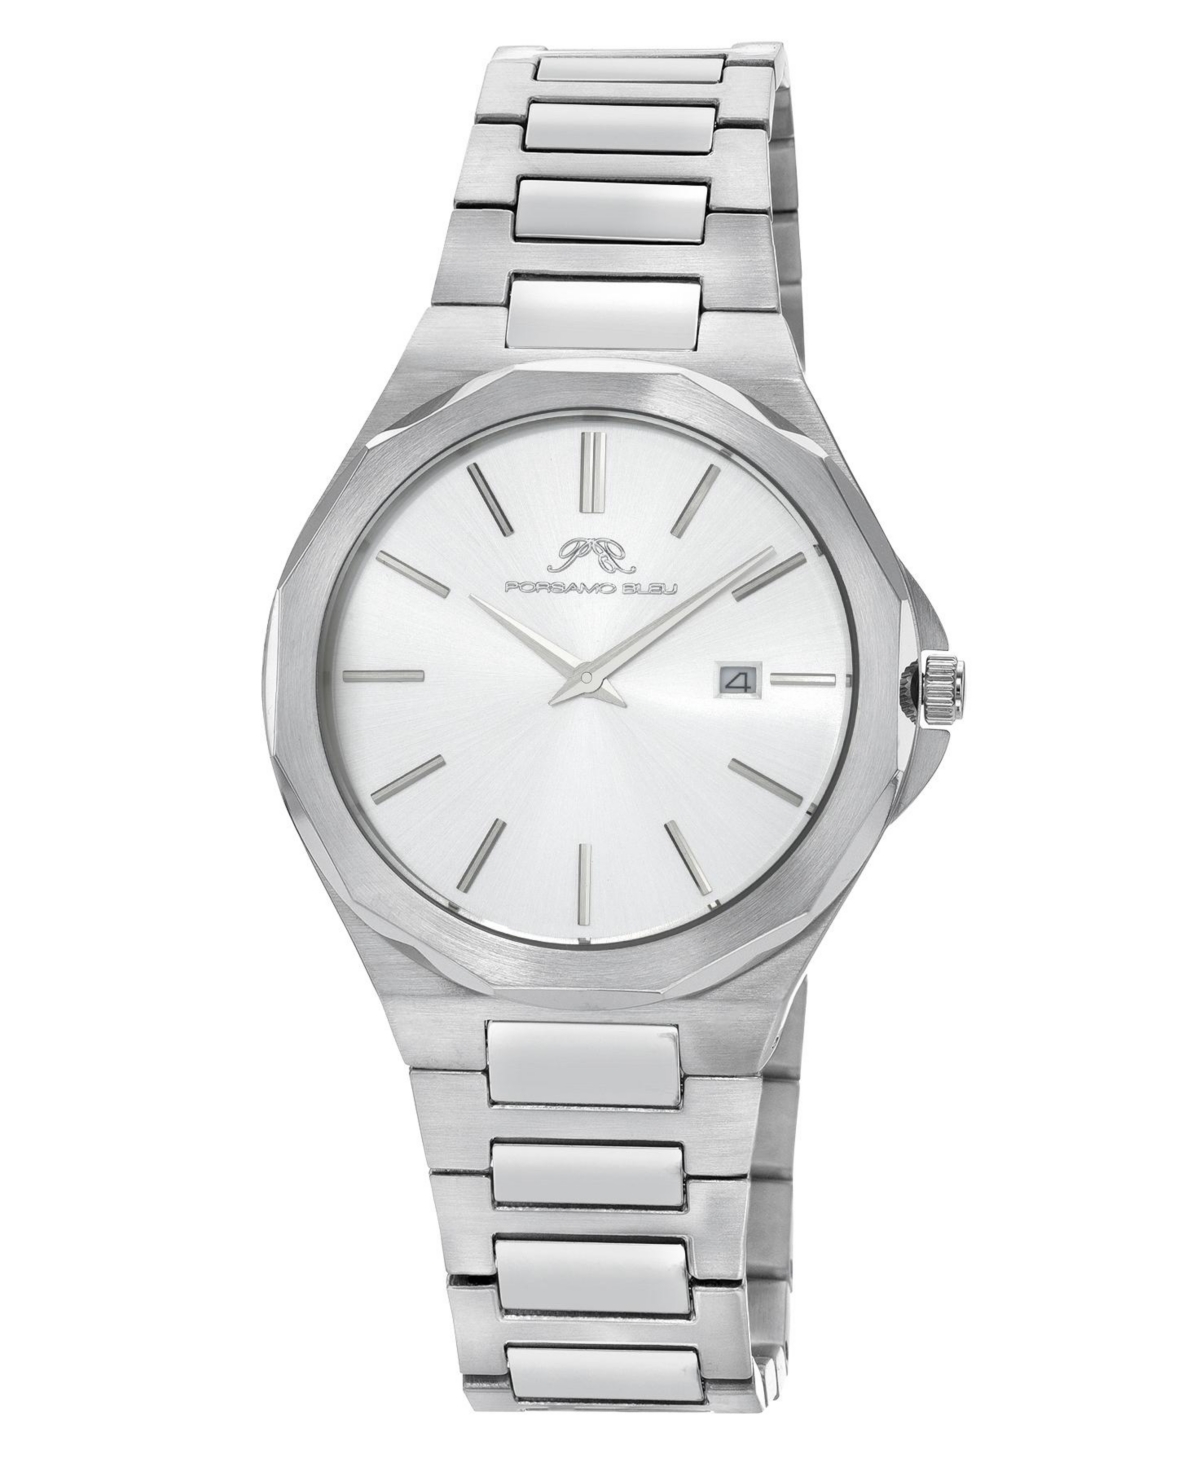 Alexander Stainless Steel Silver Tone Men's Watch 1231AALS - Silver